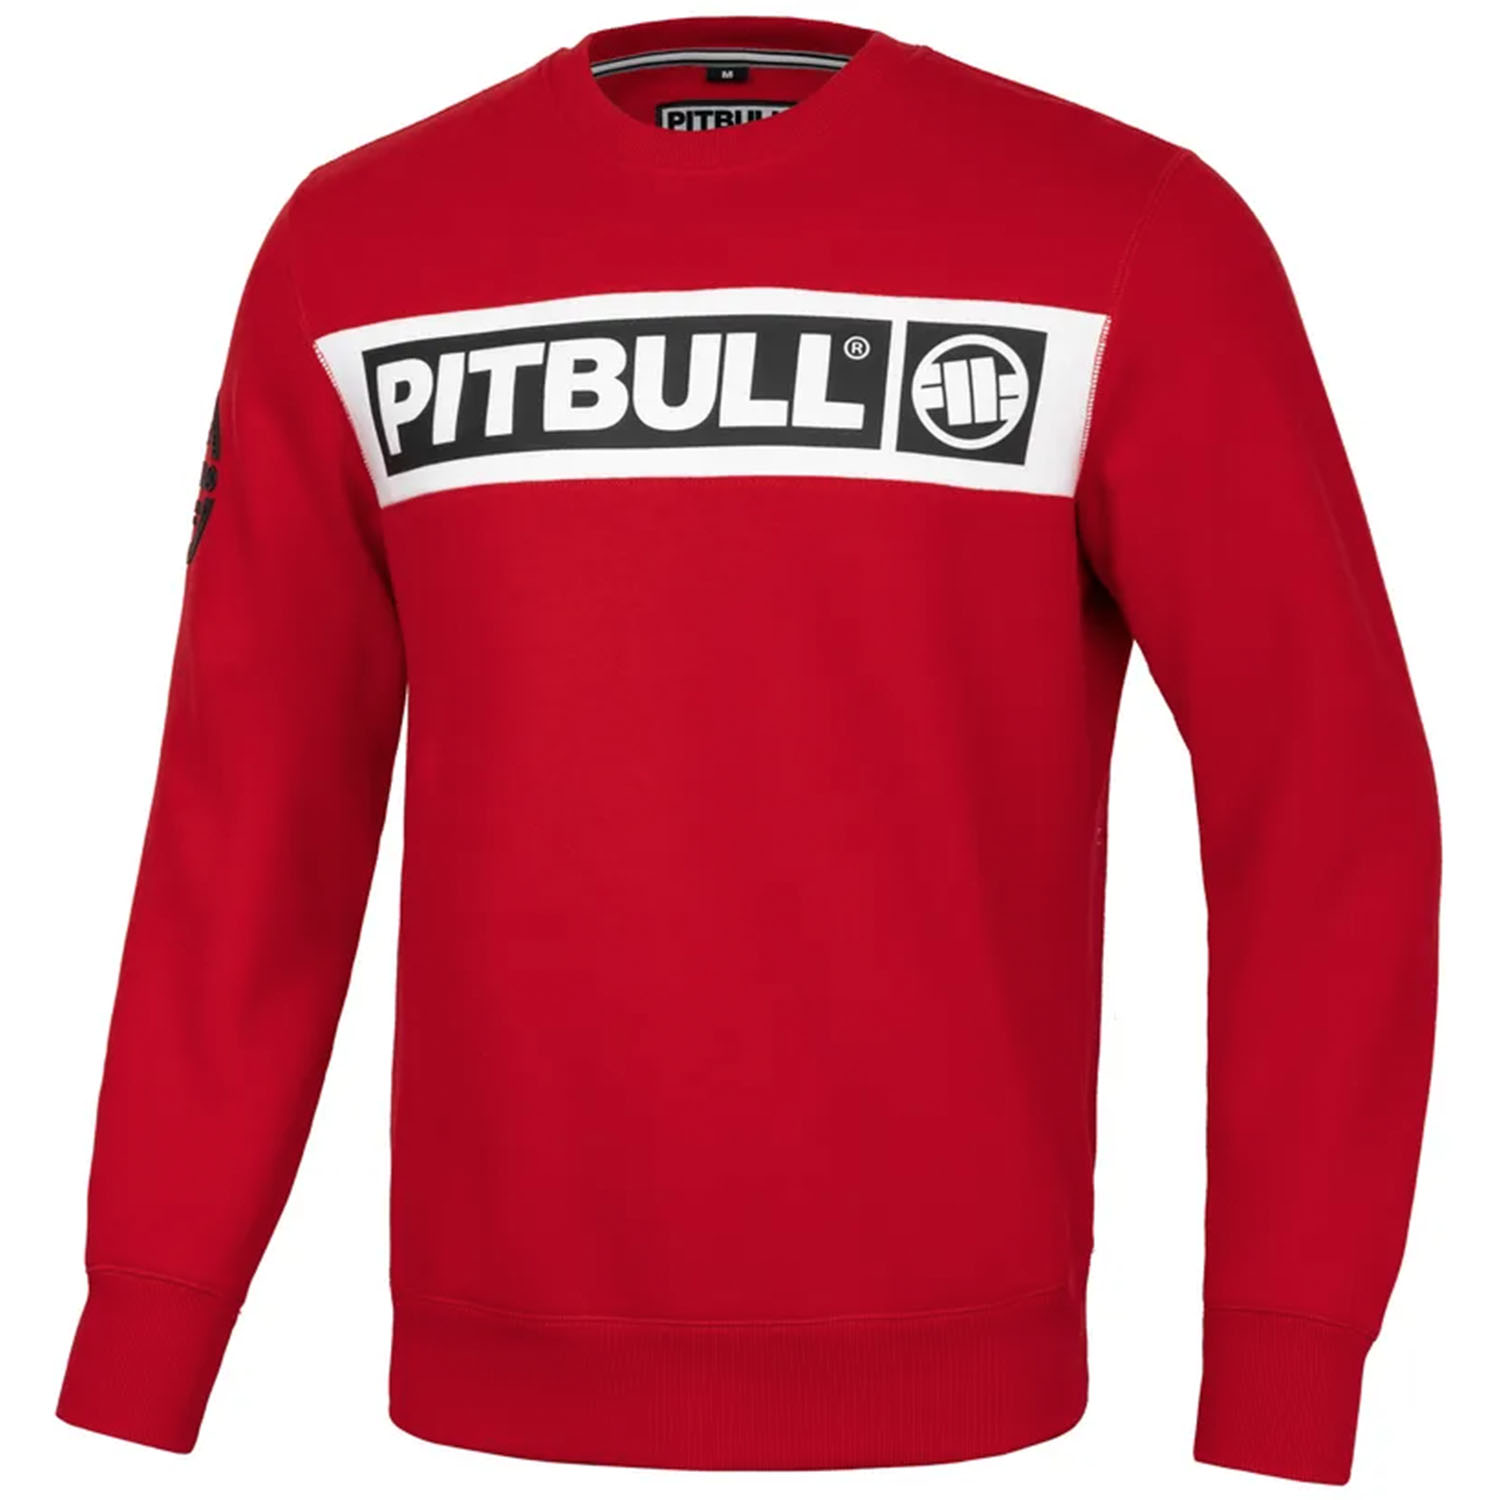 Pit Bull West Coast Pullover, Sherwood, red, XXL